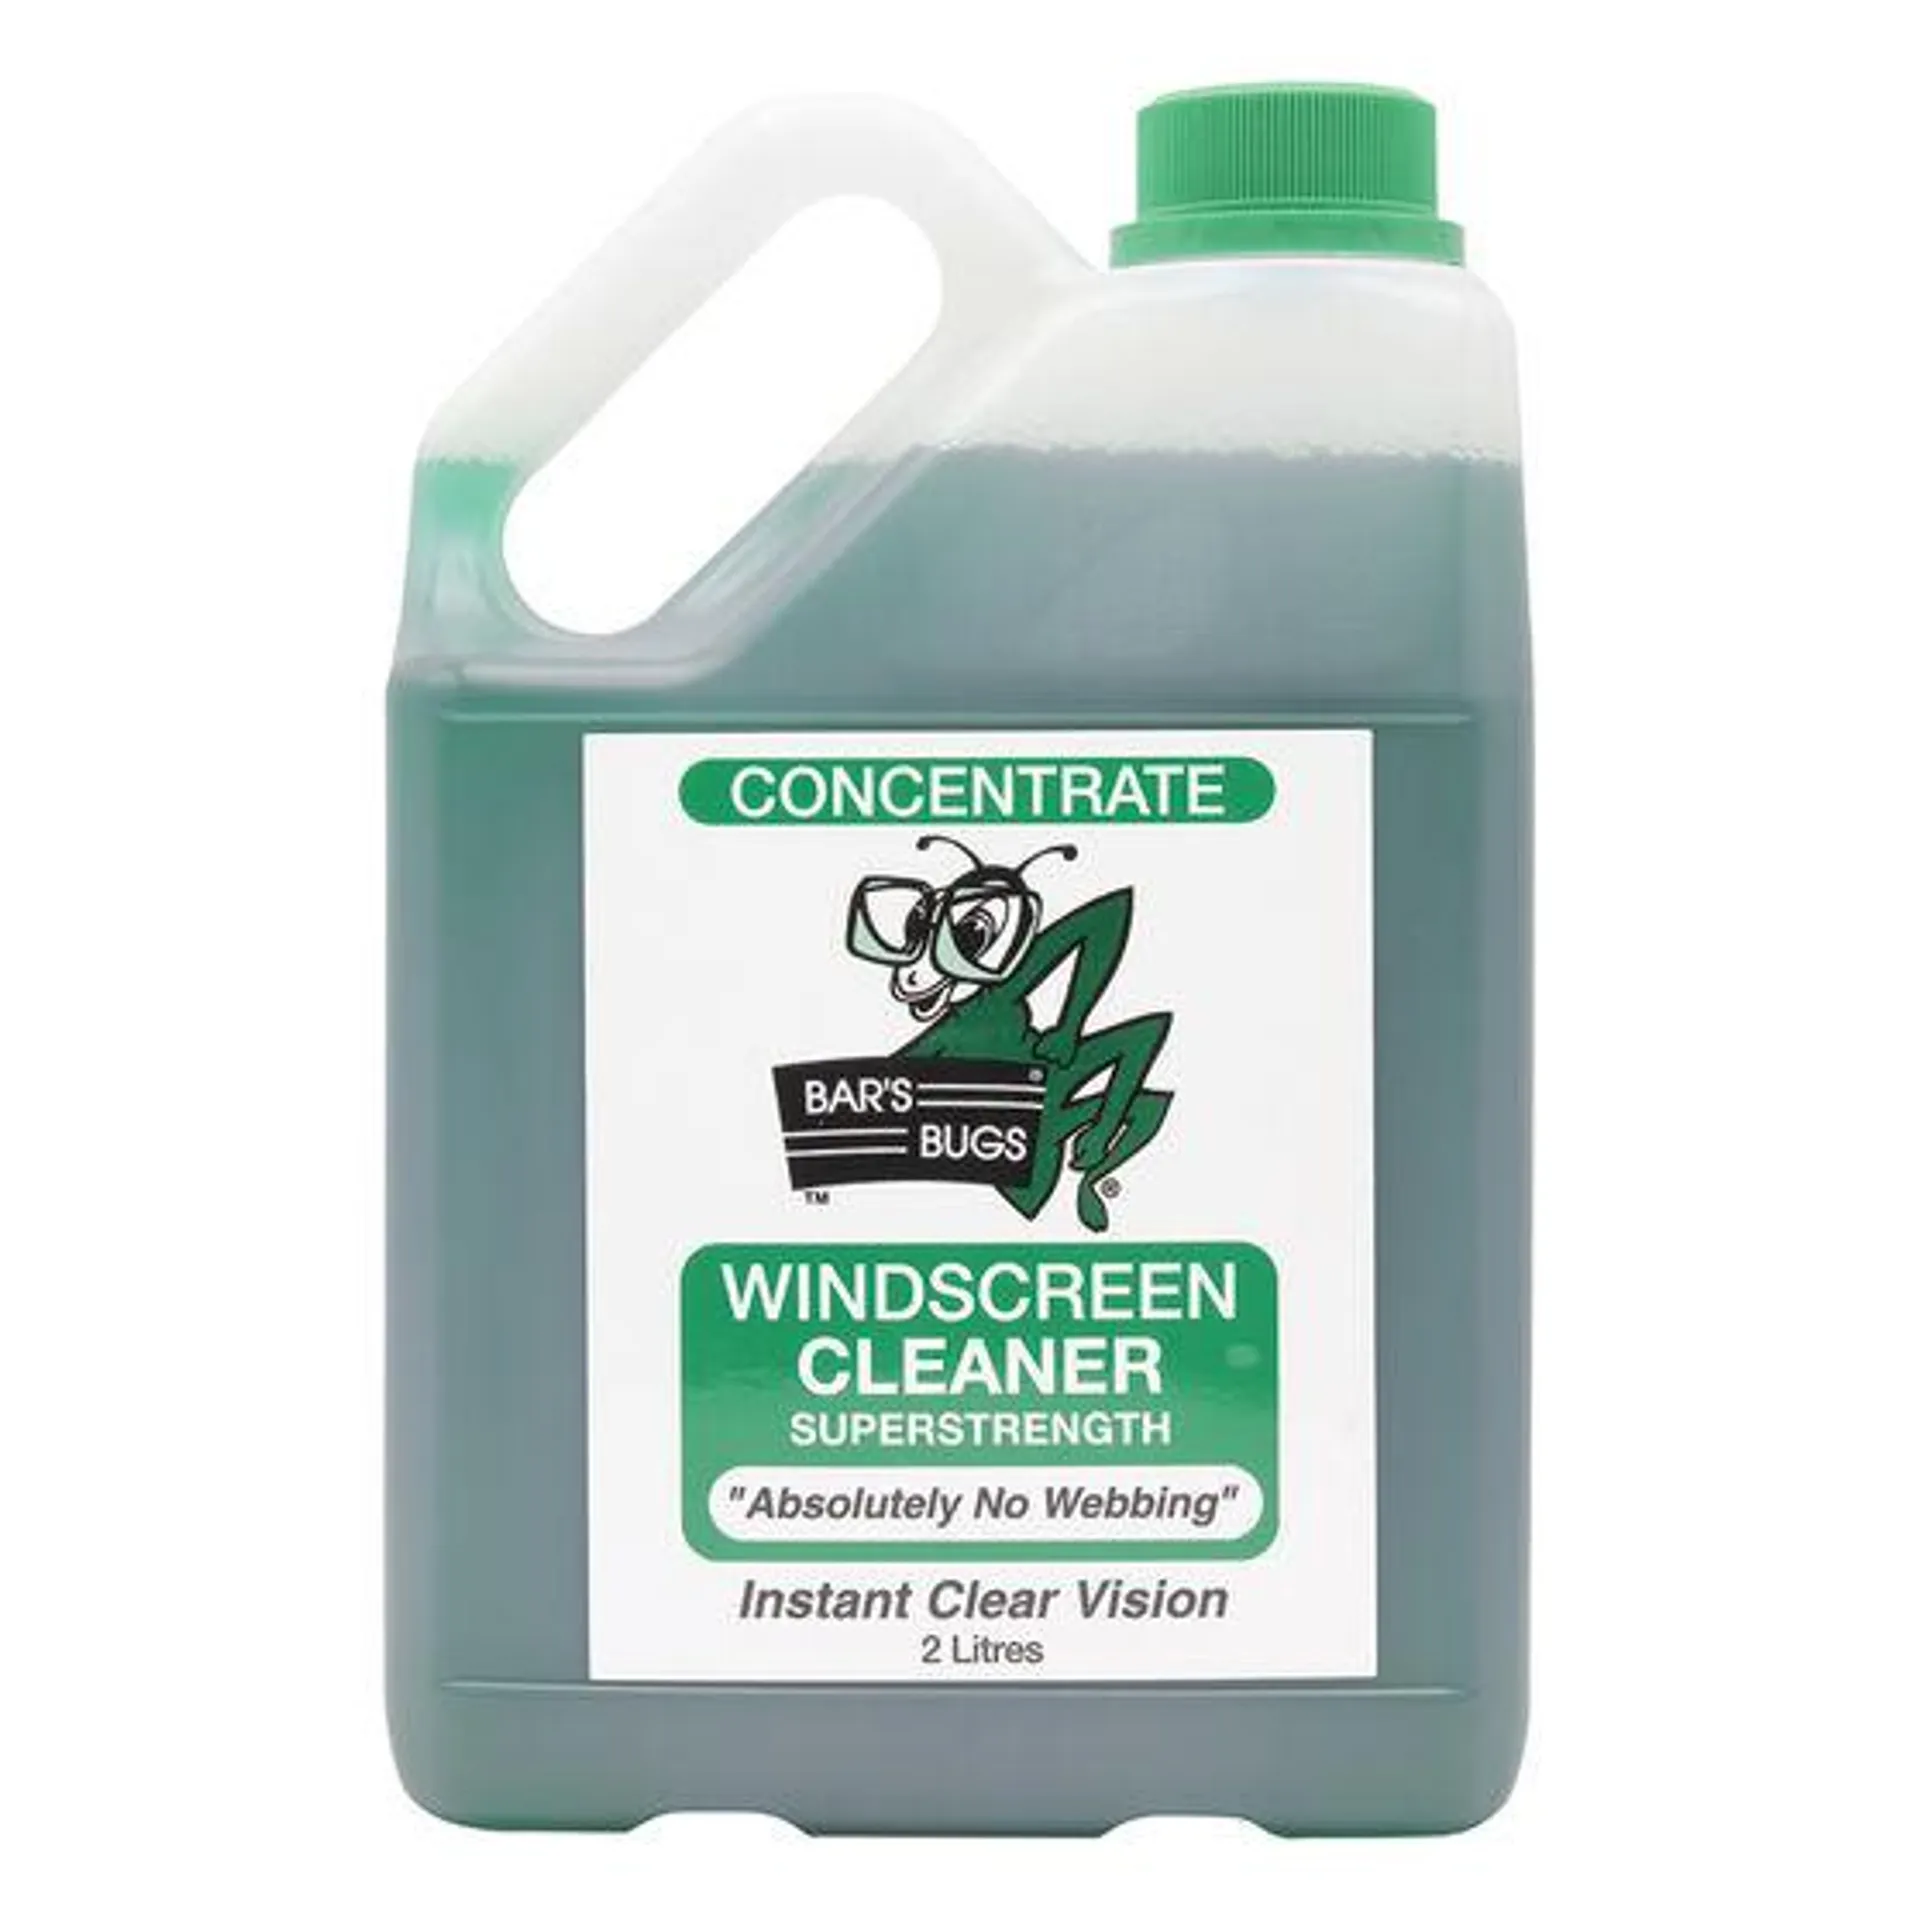 Bar's Bugs Windscreen Cleaner Concentrate 2L